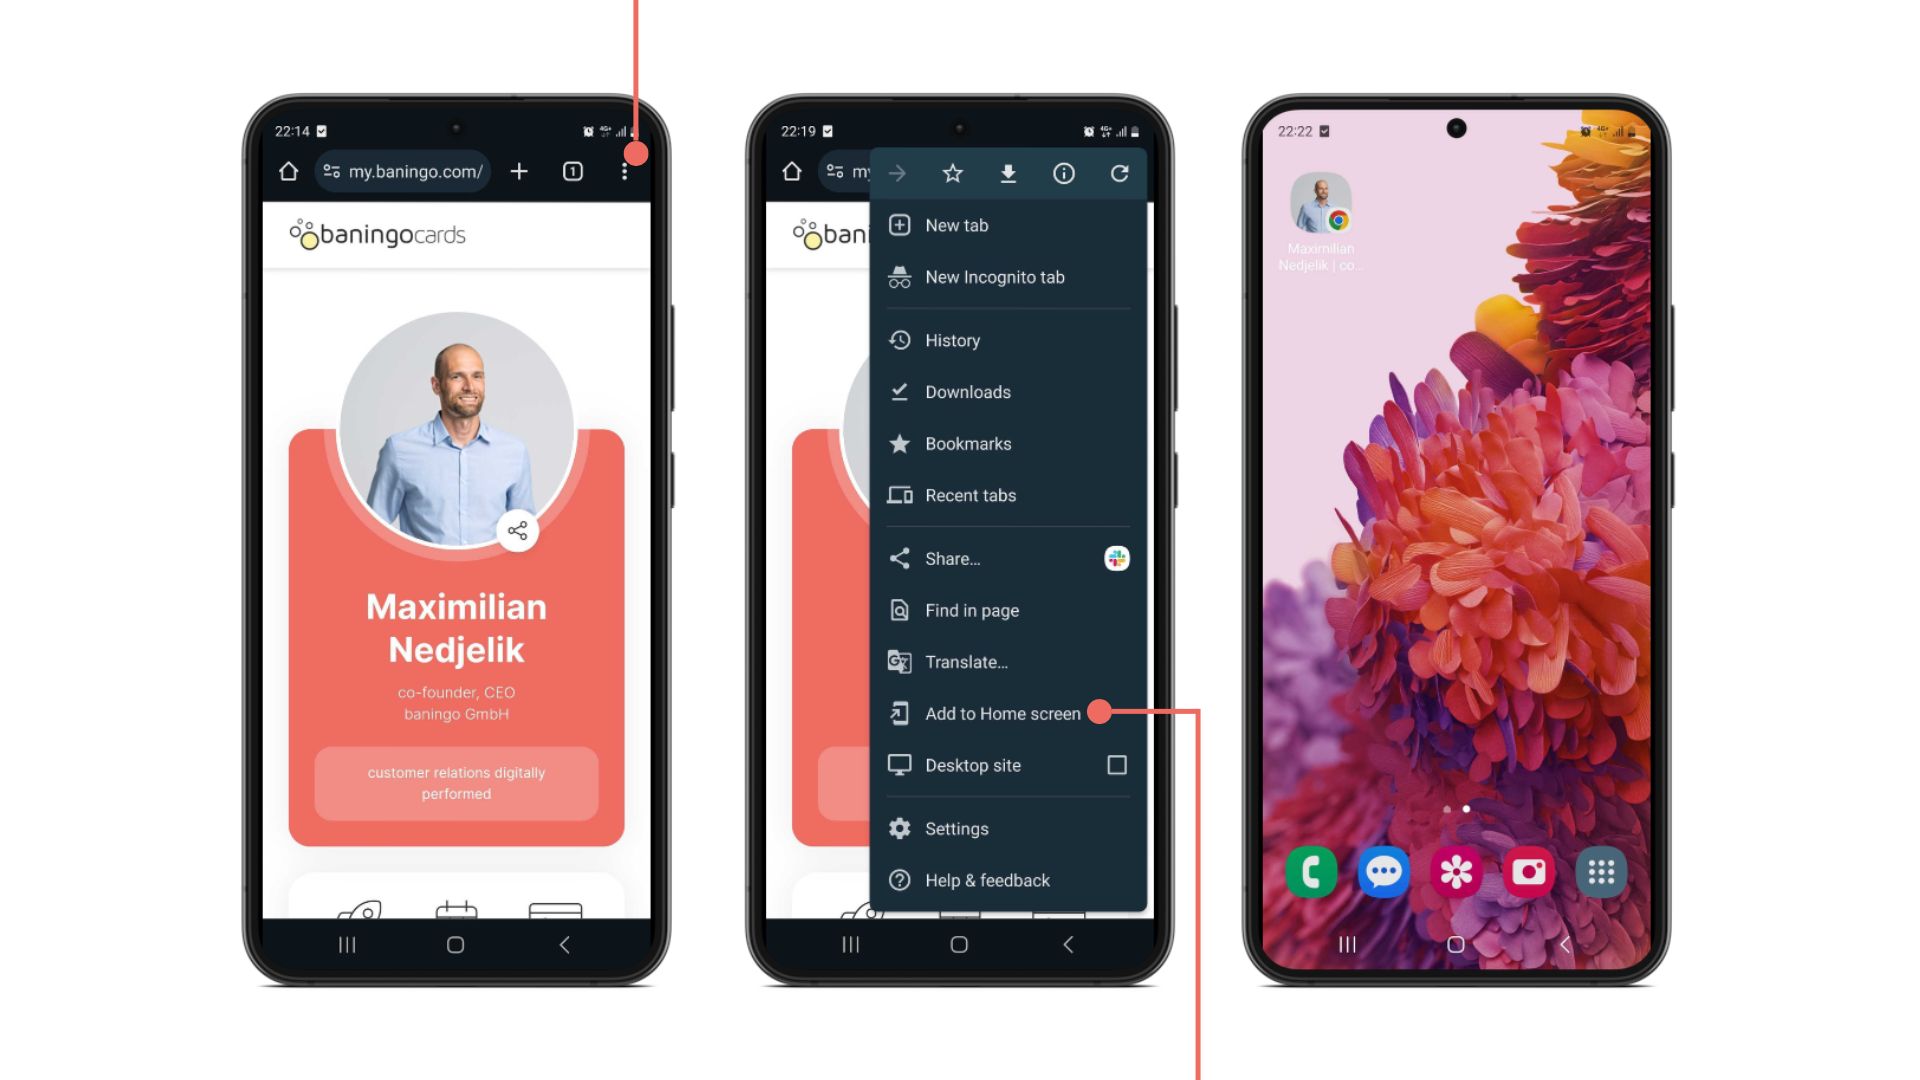 Add your digital business card to the homescreen on Android